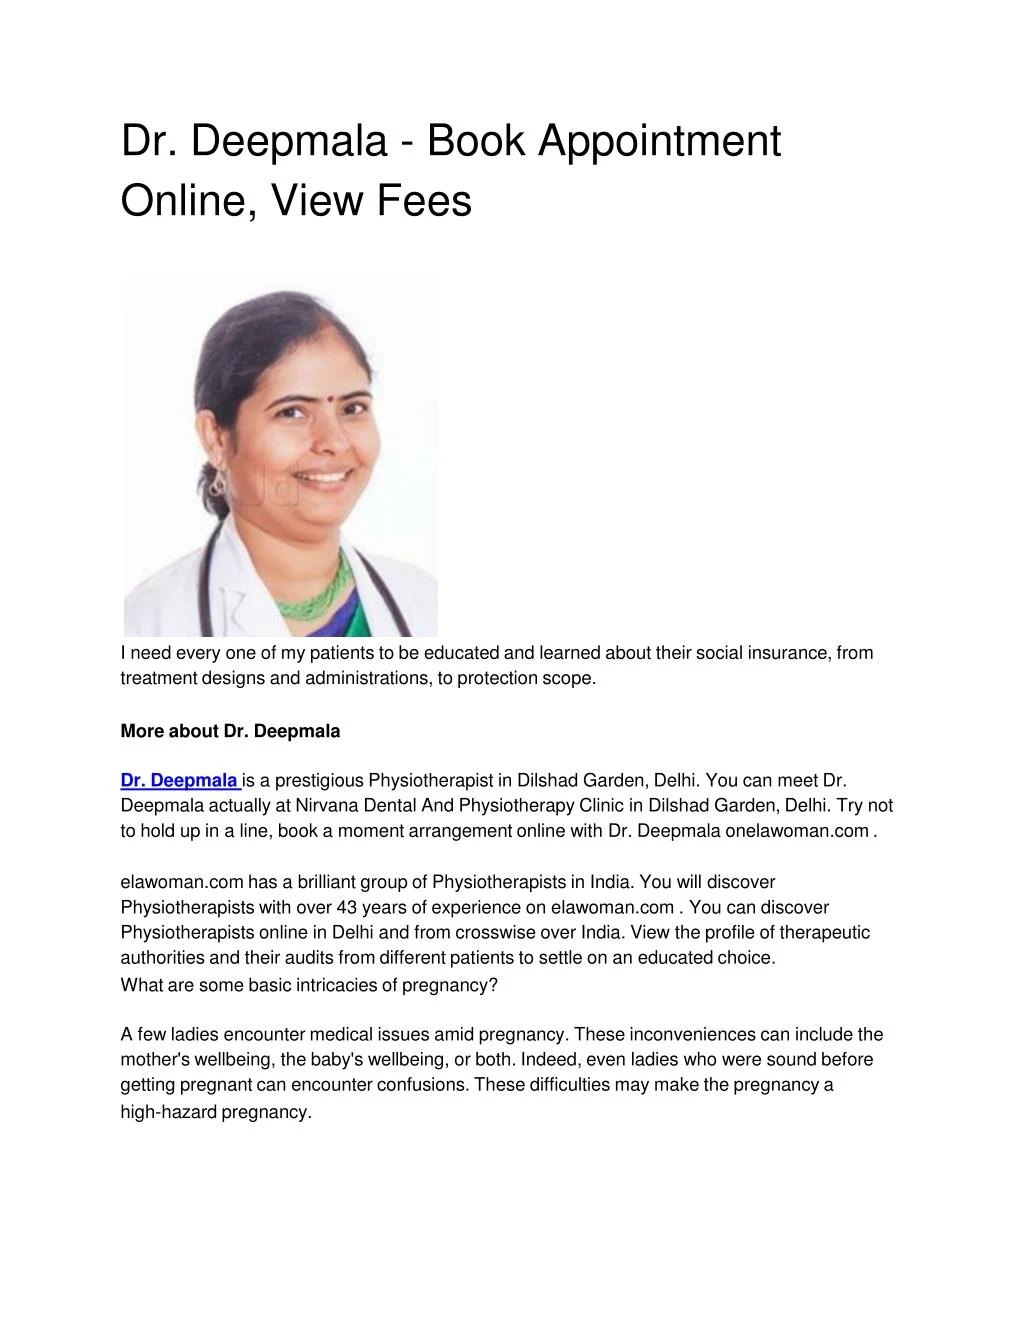 dr deepmala book appointment online view fees